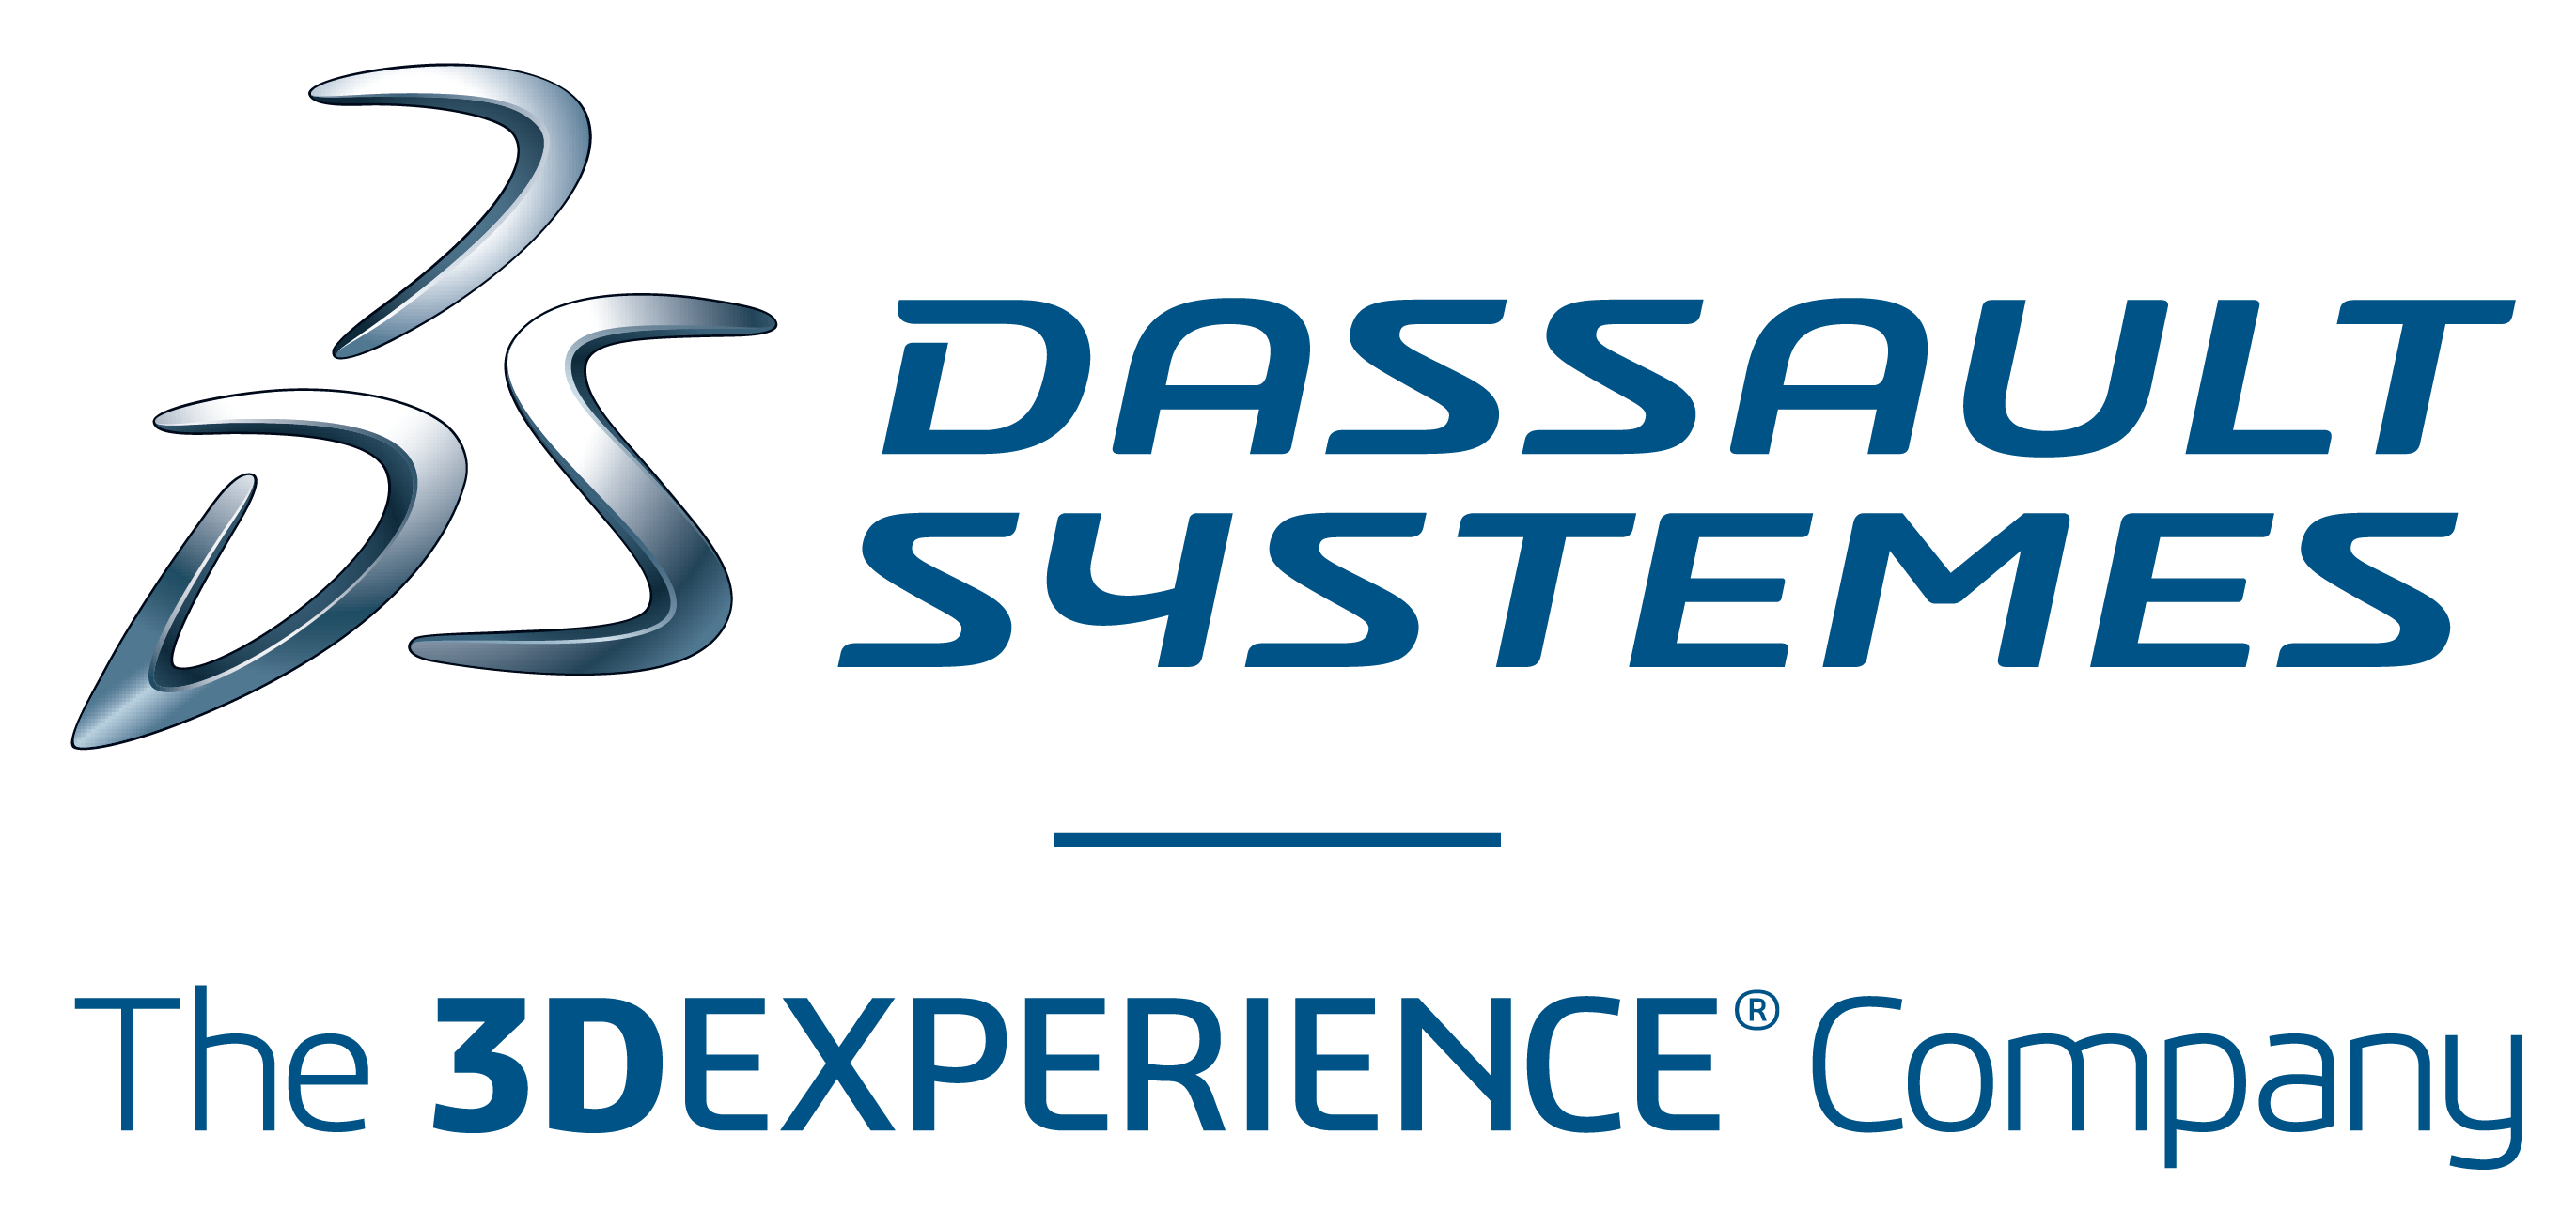 Dassault Systemes South Africa (Pty) Ltd